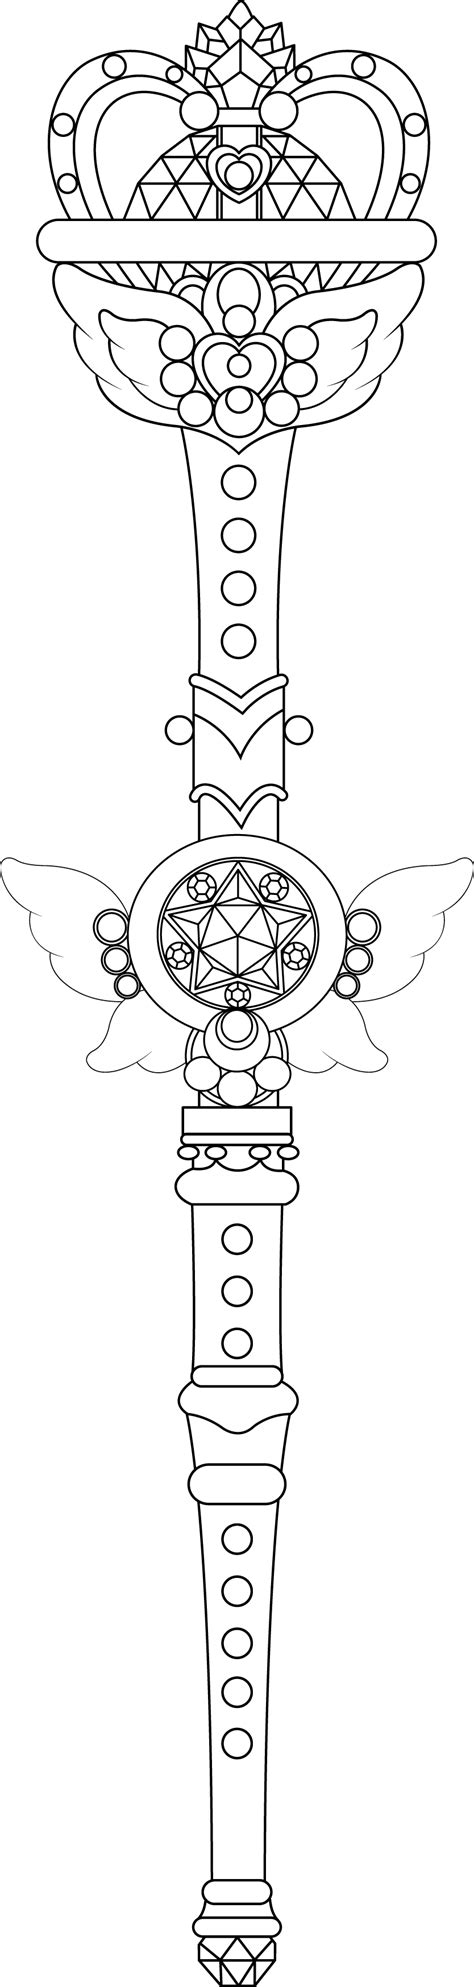 Pin By Spetri On LineArt Sailor Moon Sailor Moon Coloring Pages Sailor Moon Art Sailor Moon